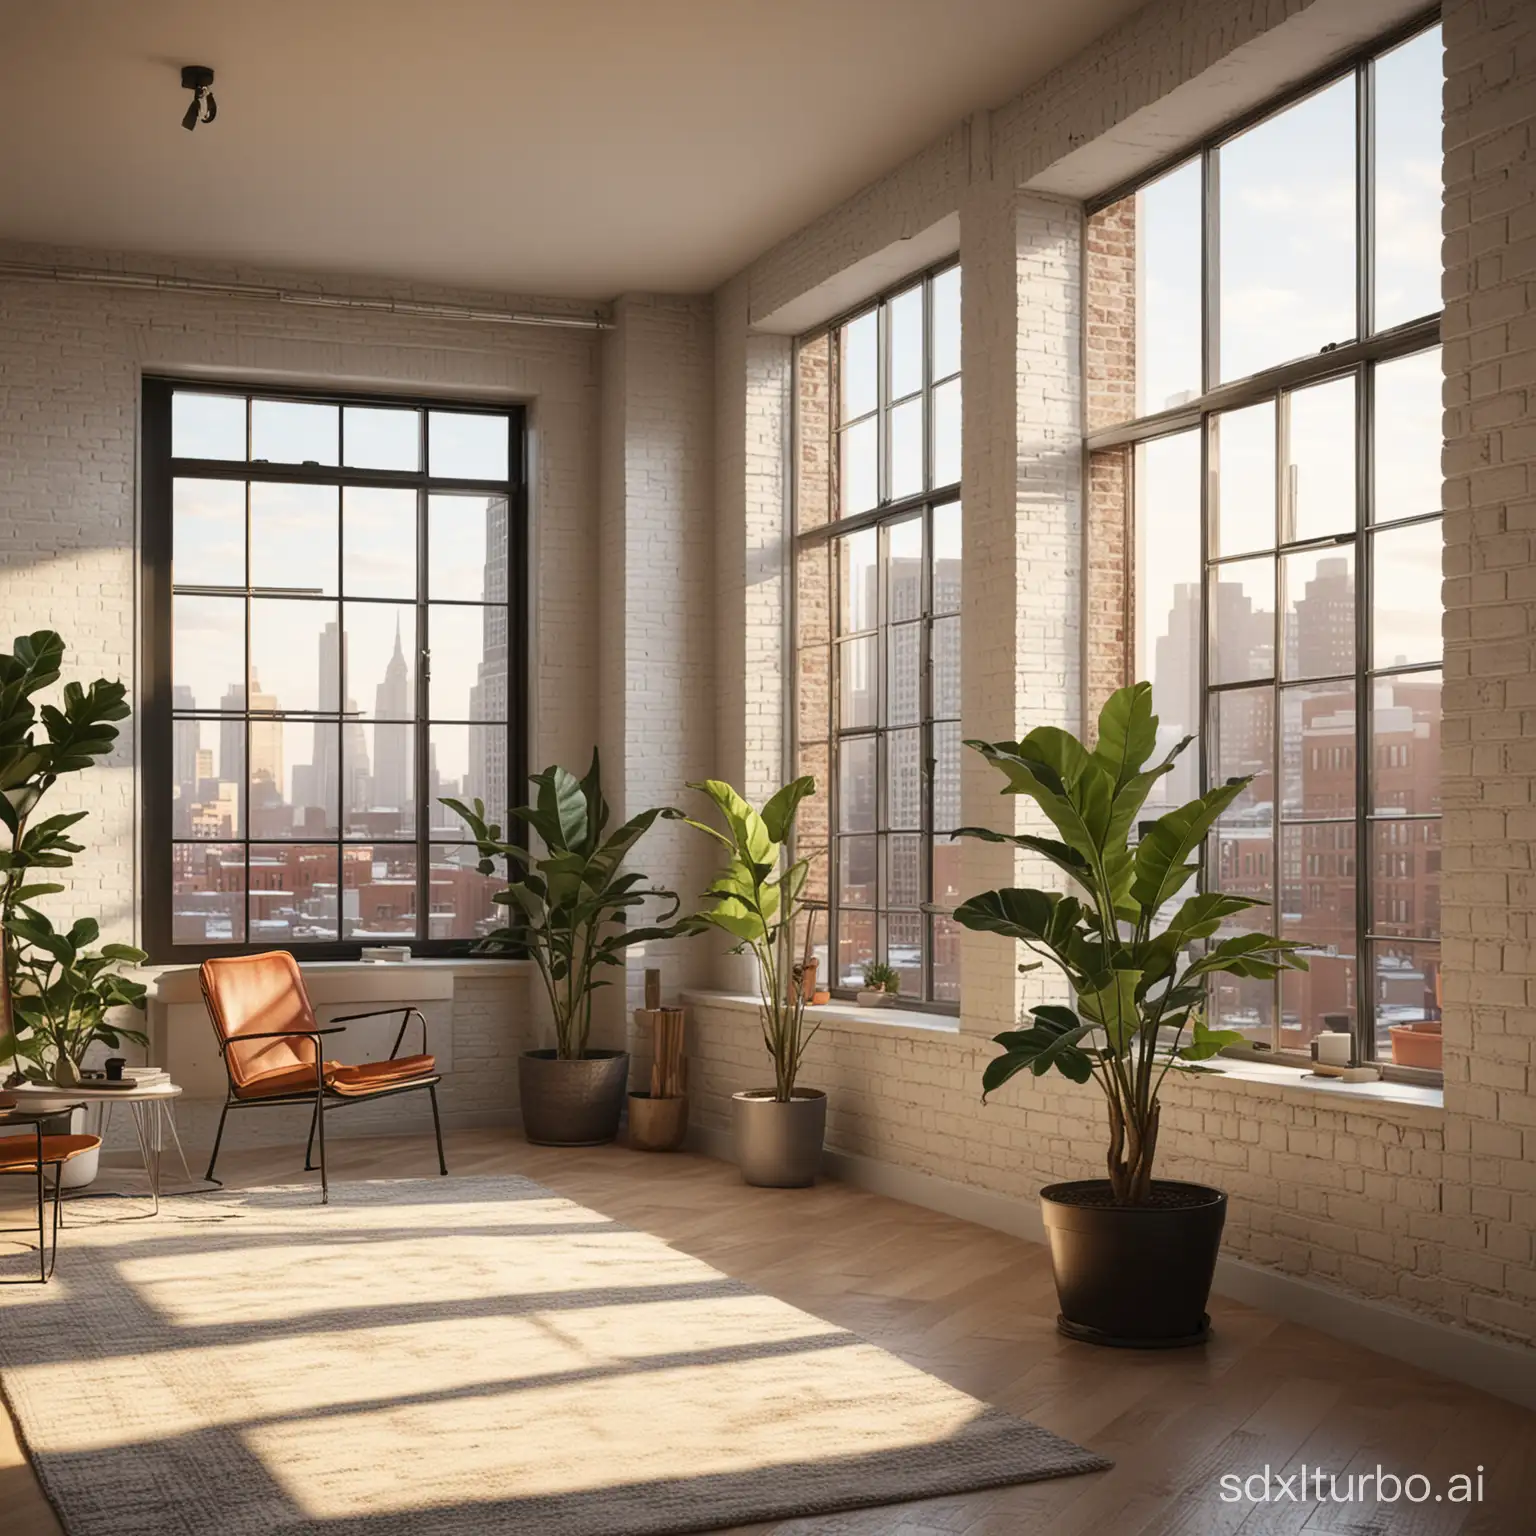 Spacious-Loft-Interior-with-Cityscape-View-and-Fiddle-Leaf-Fig-Plant